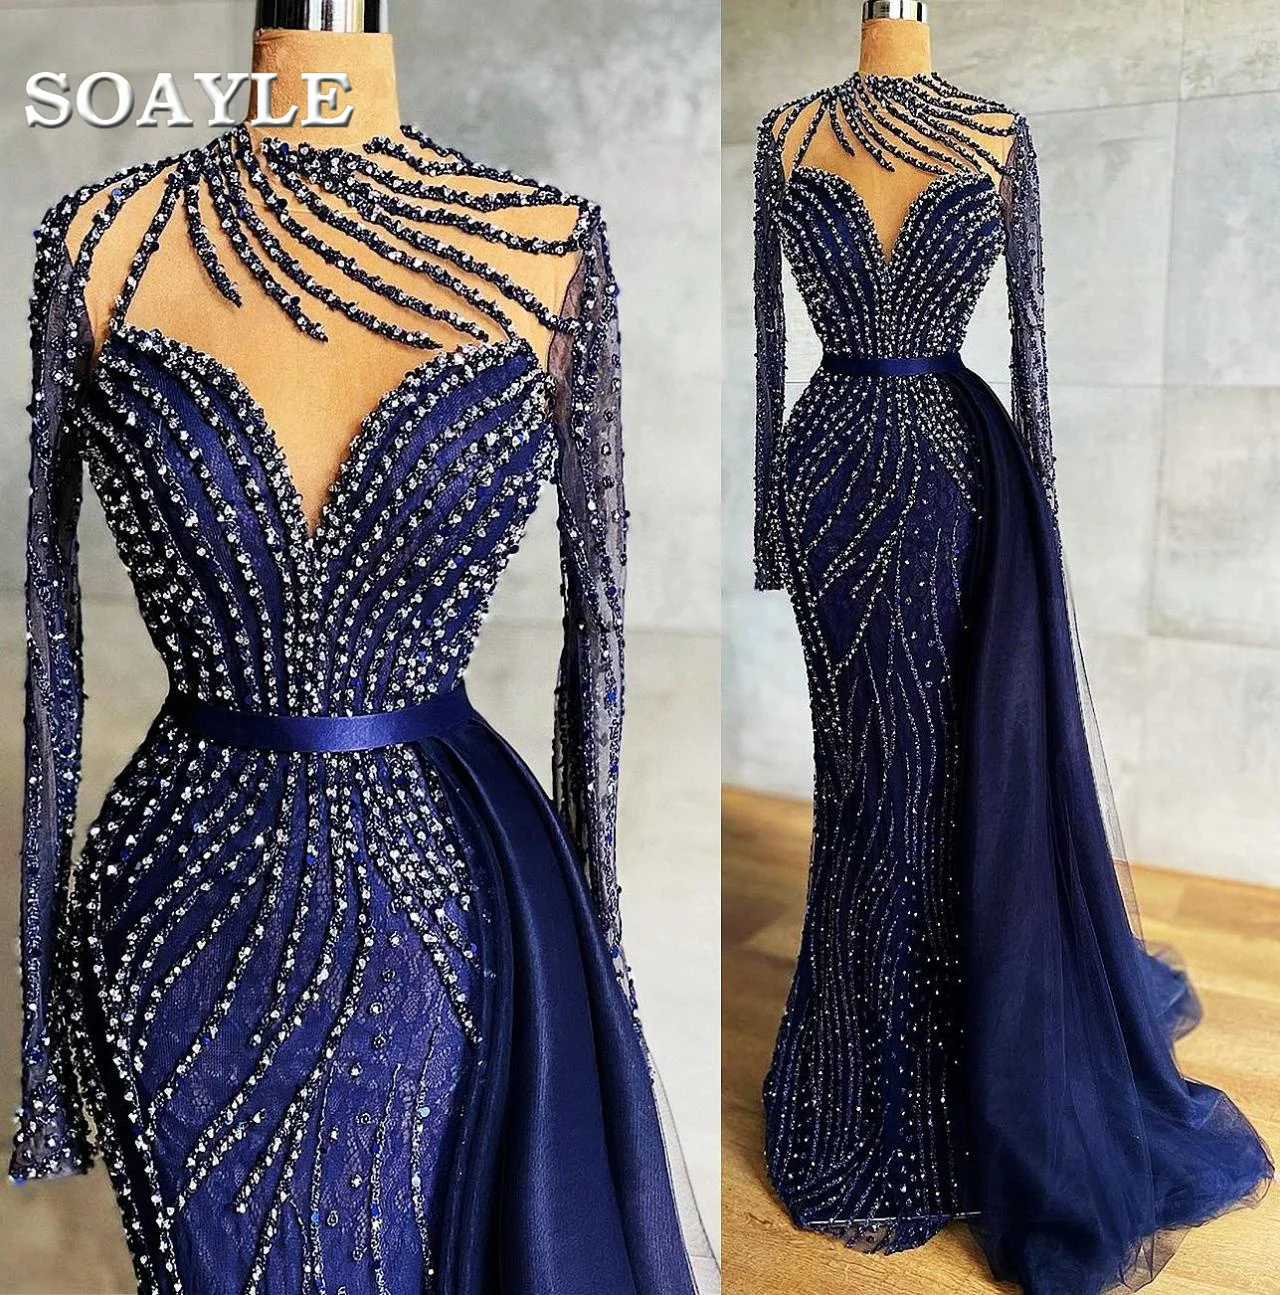 womens formal dresses Long Sleeves Evening Dresses Beading Luxury Prom Dress Navy Satin Custom Made Long Dress Prom Gowns sexy ball gowns Evening Dresses